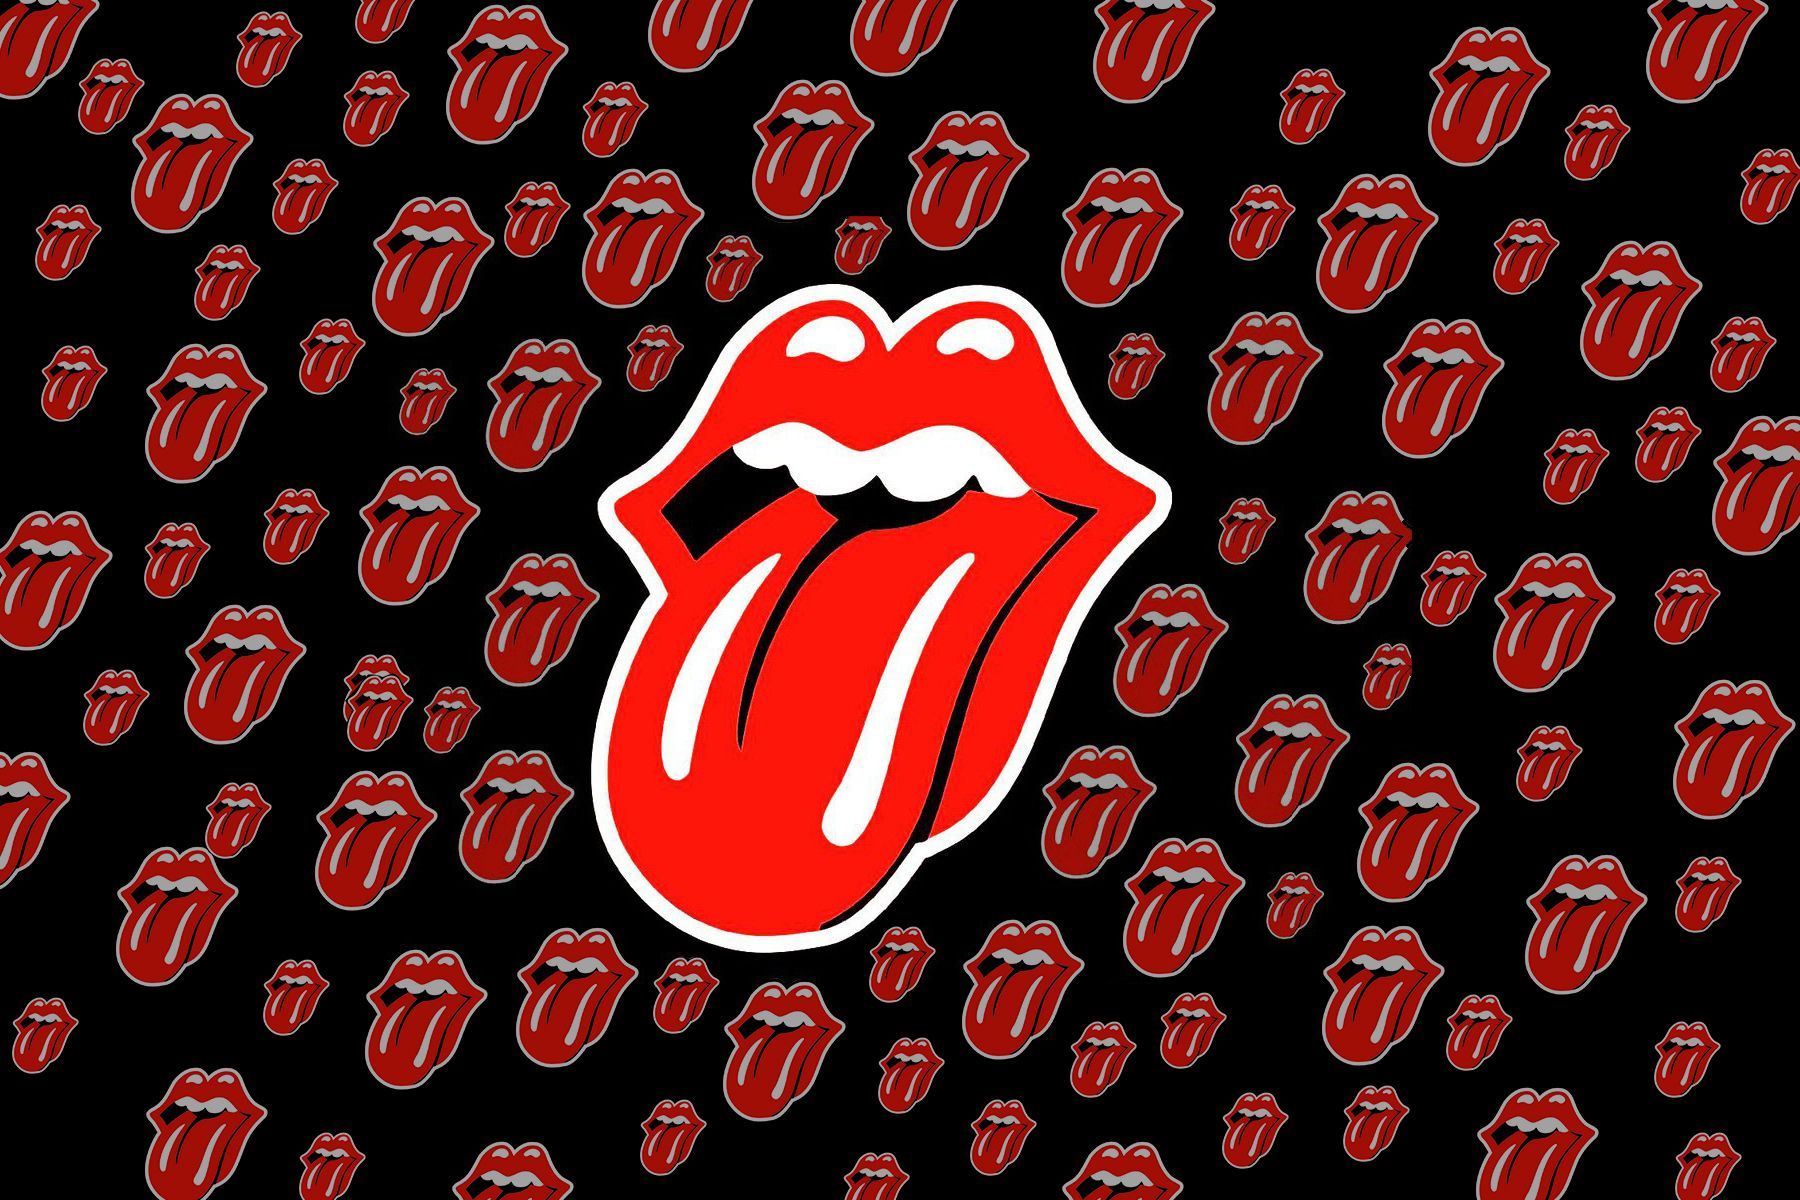 Rolling Stones Computer Wallpaper Free Rolling Stones Computer Background